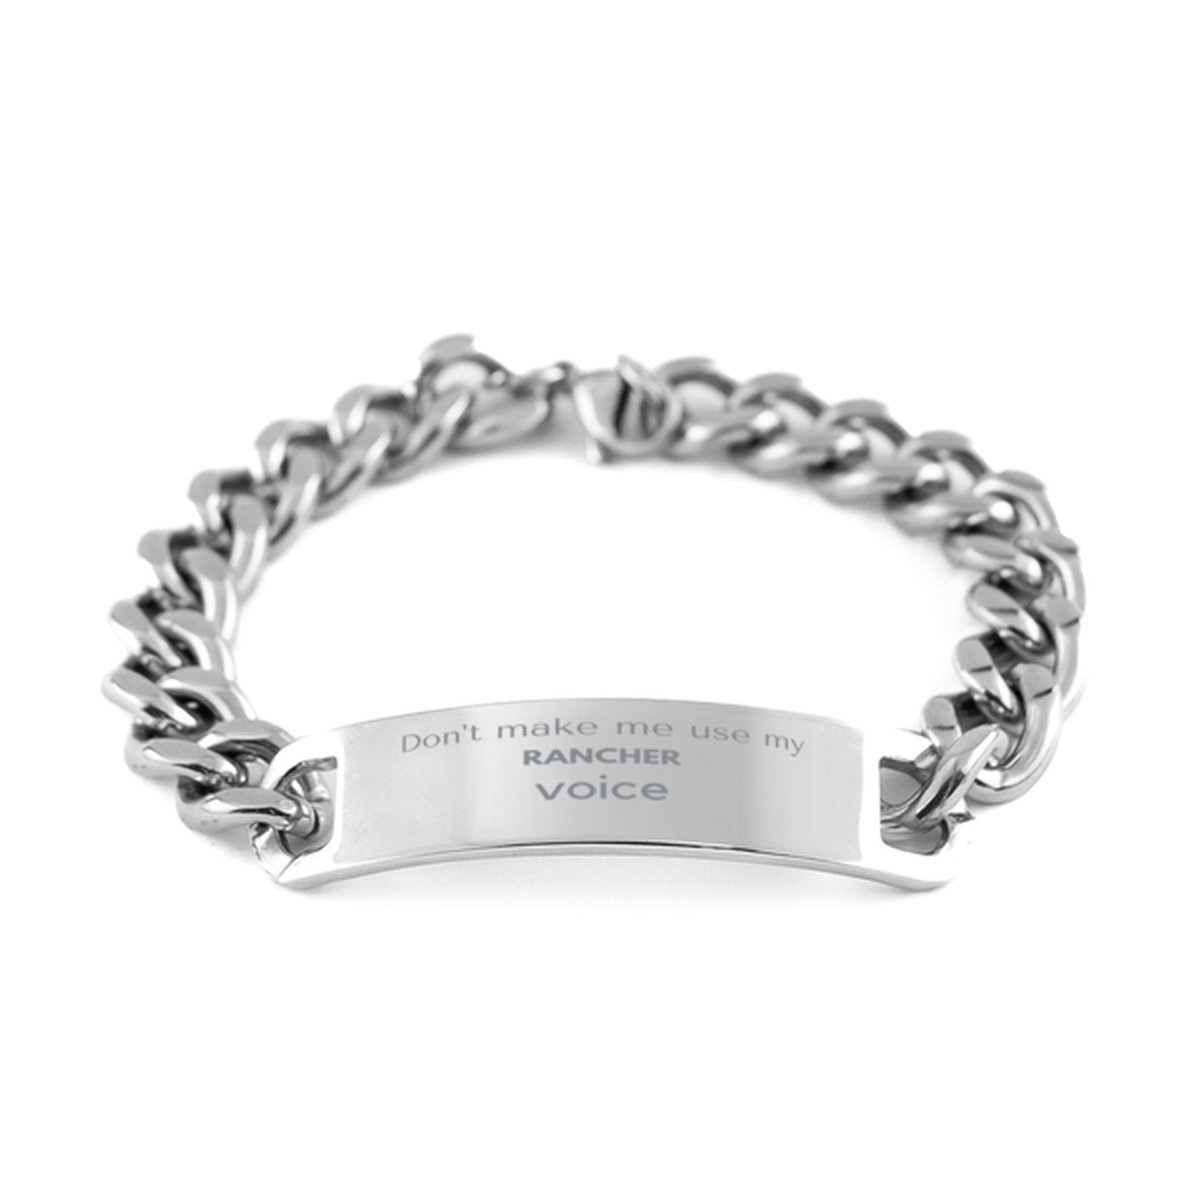 Don't make me use my Rancher voice, Sarcasm Rancher Gifts, Christmas Rancher Cuban Chain Stainless Steel Bracelet Birthday Unique Gifts For Rancher Coworkers, Men, Women, Colleague, Friends